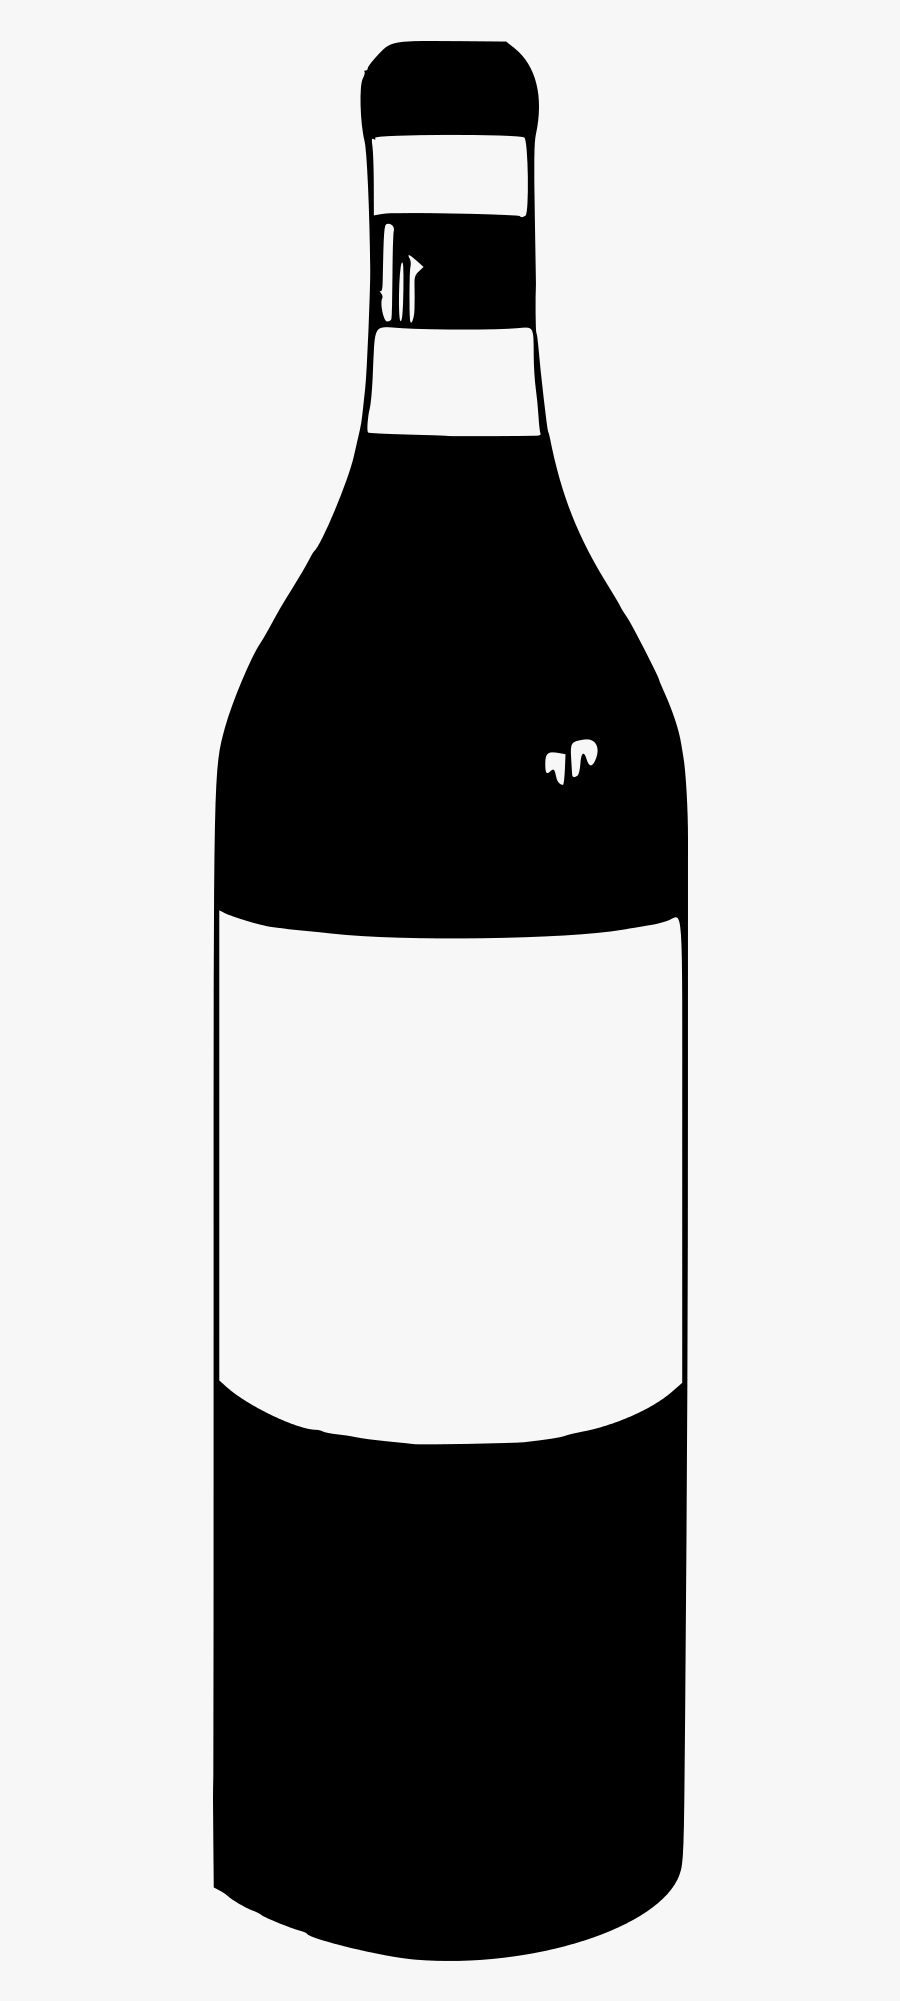 Clipart - Wine Bottle Black Png , Free Transparent Clipart - ClipartKey.